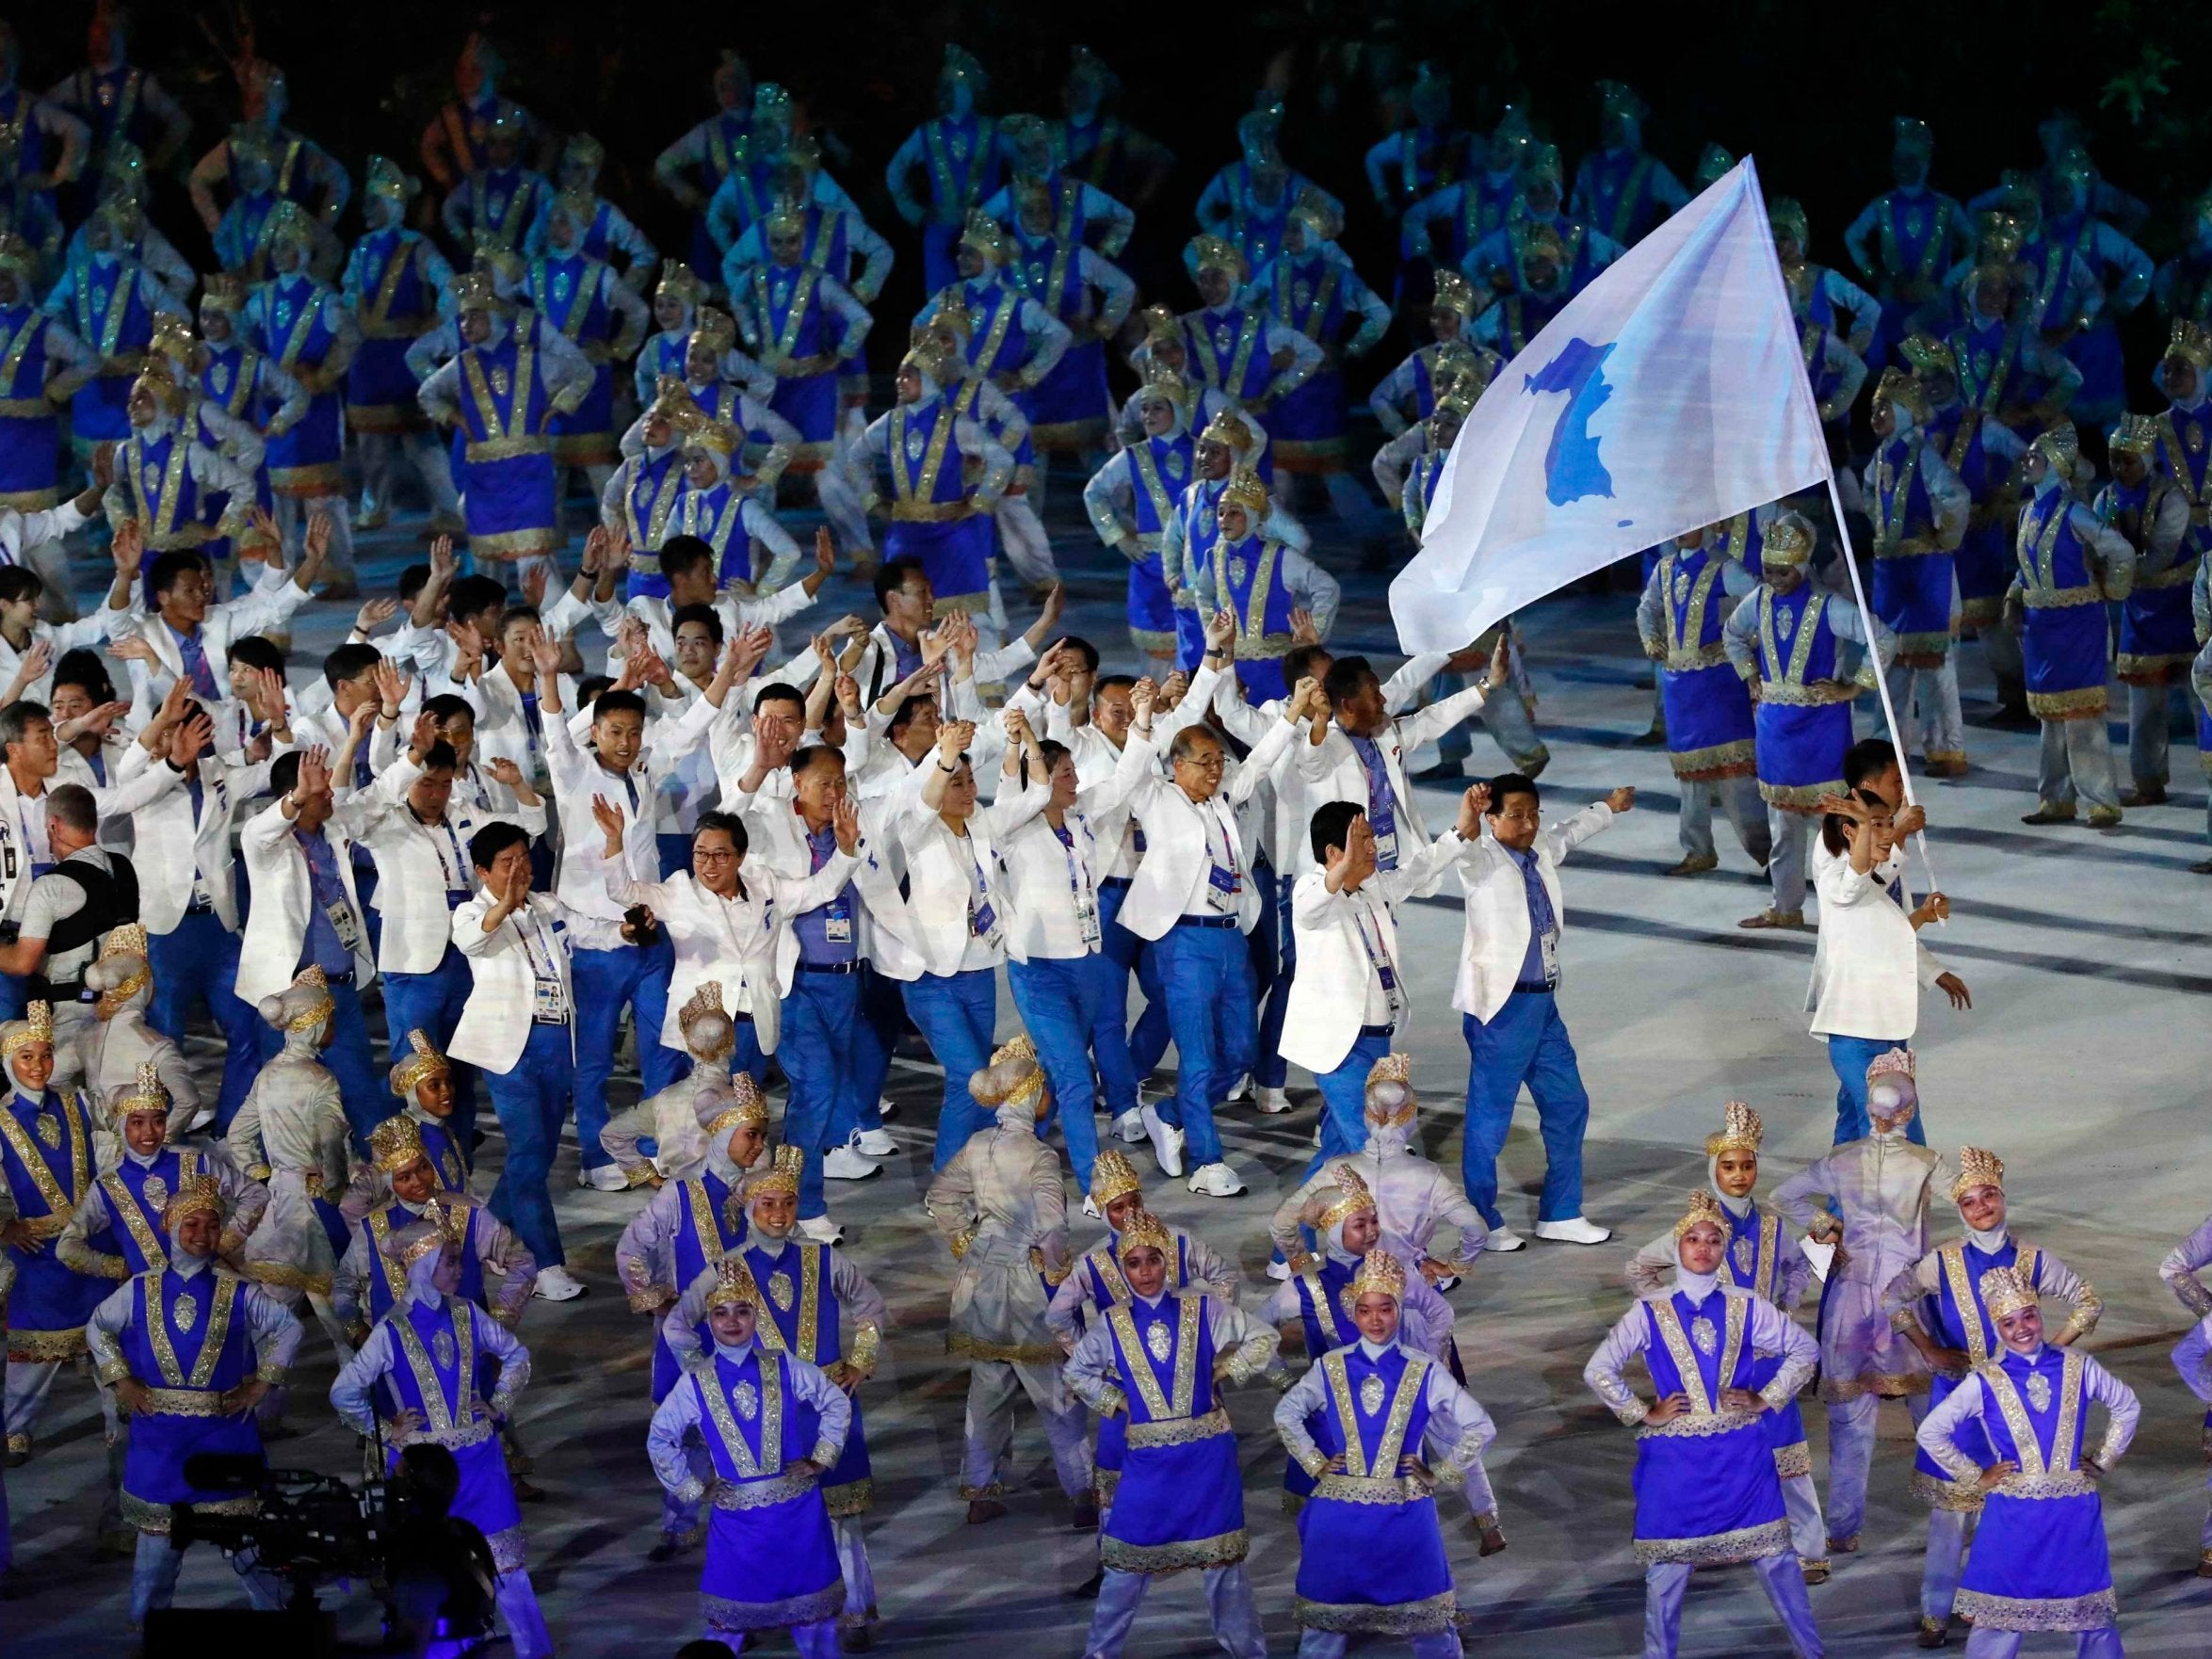 Athletes from North and South Korea marched behind a unified flag at the Asian Games